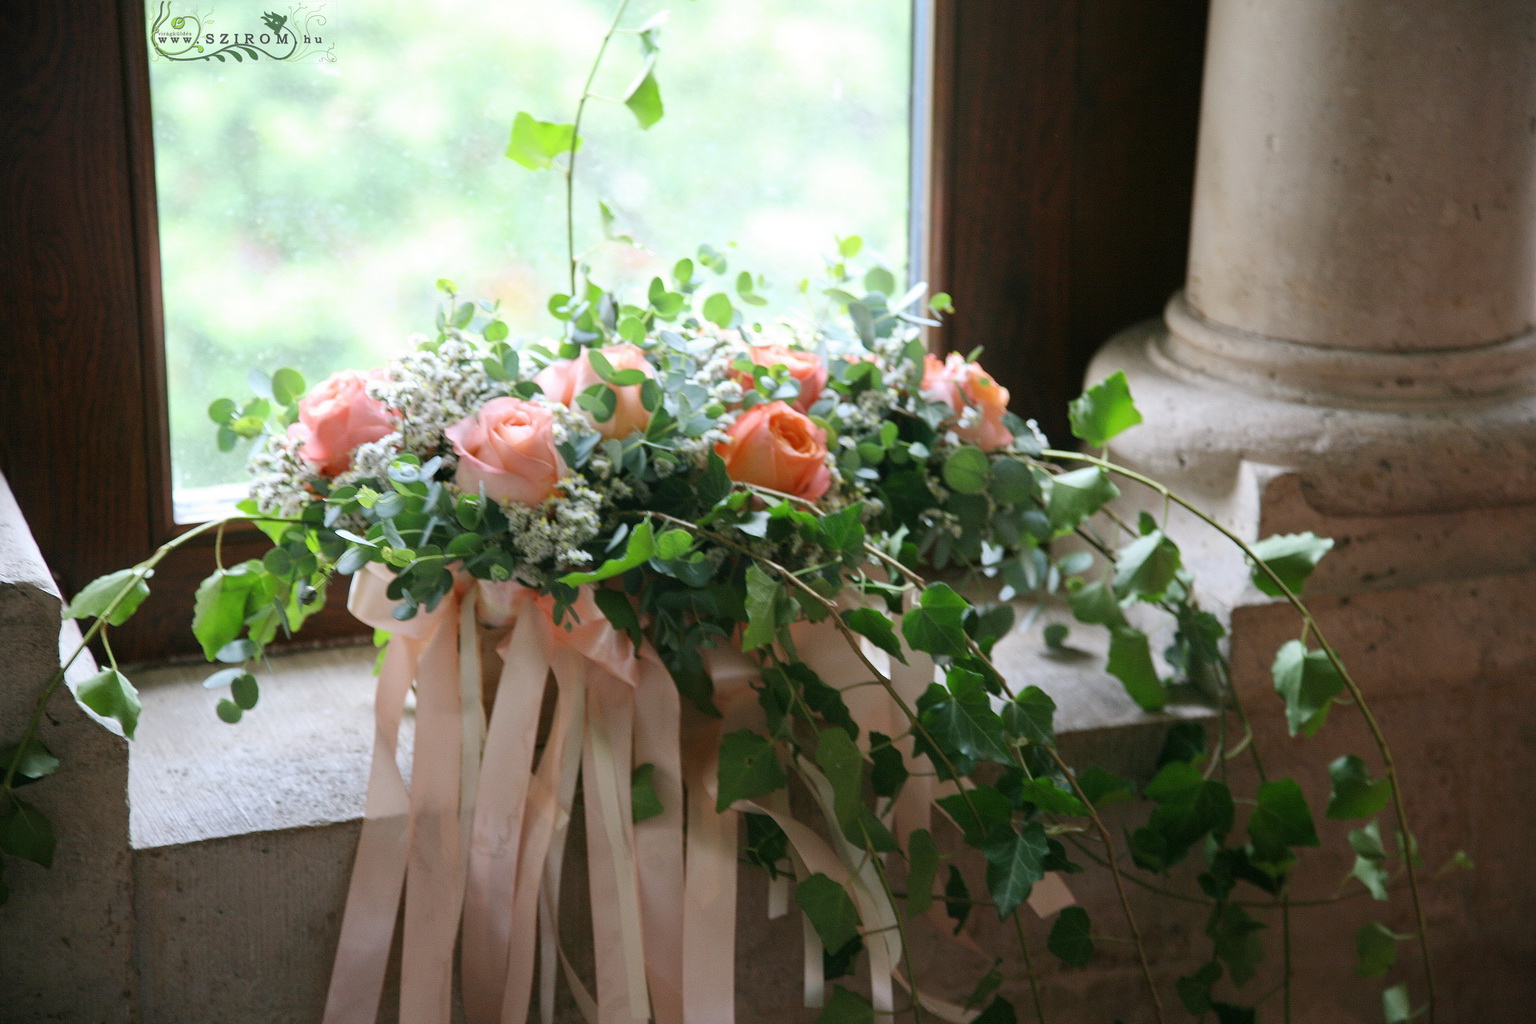 flower delivery Budapest - window decor with flagging ribbons, Fisherman's Bastion Budapest (peach rose), wedding